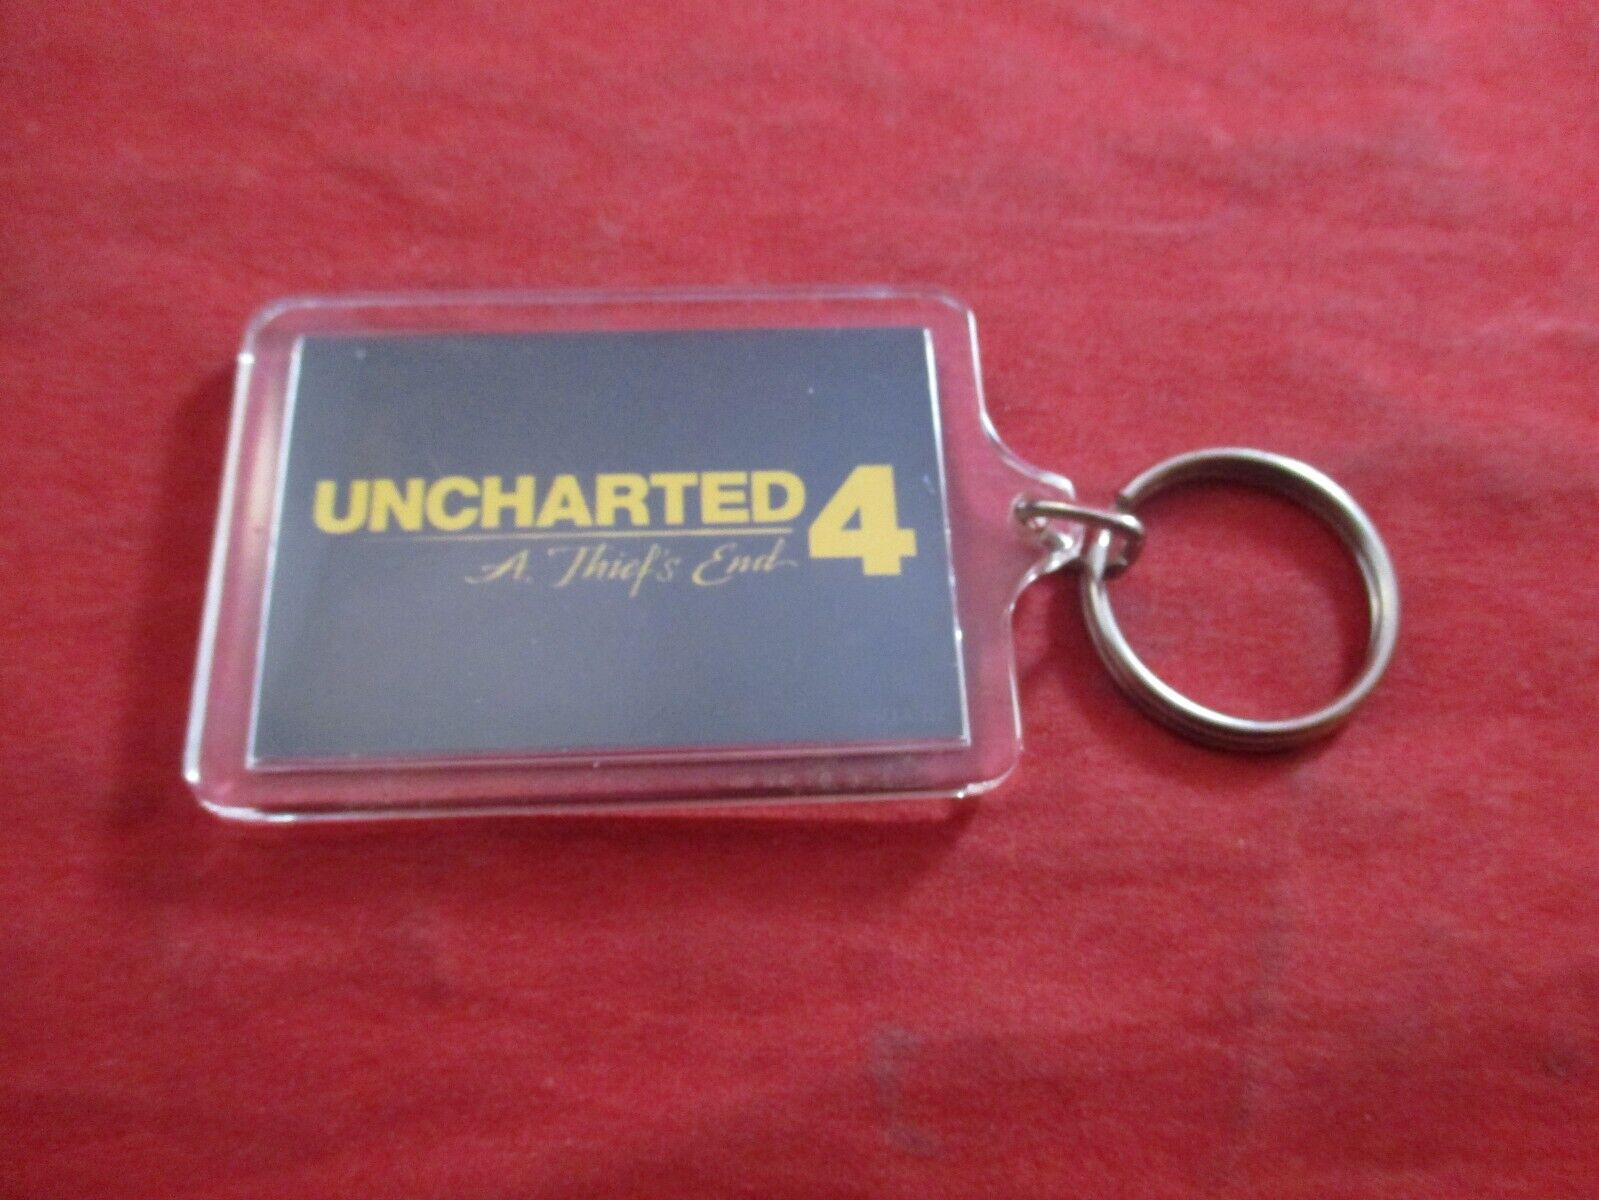 Uncharted 4: A Thief's End Playstation 4 PS4 Promotional Keychain Key Chain